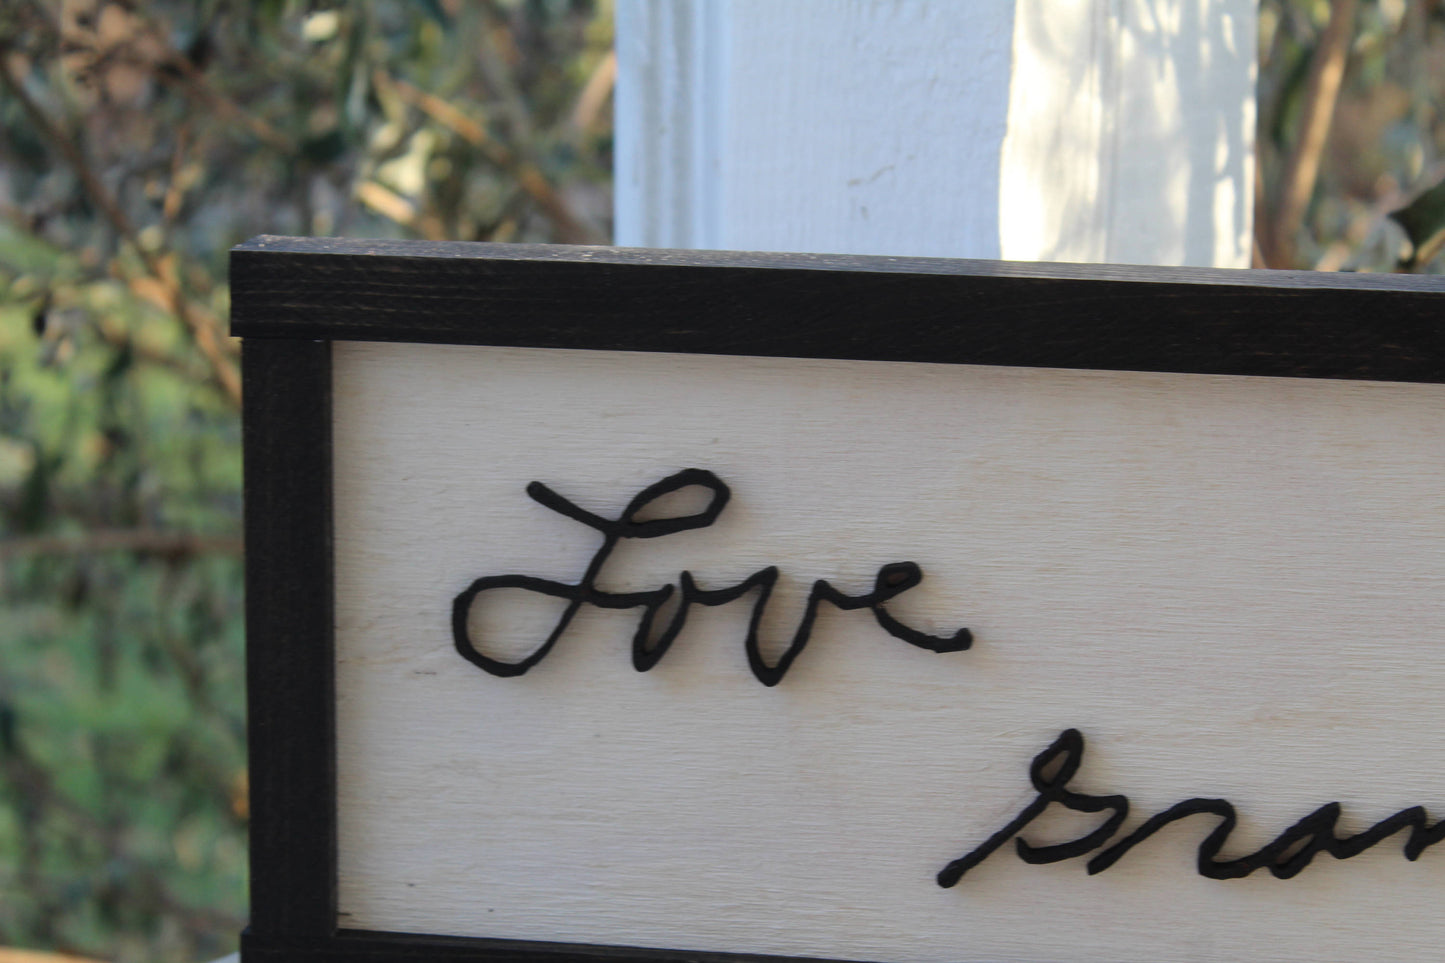 Your Hand Writing, Actual Handwriting, In Memory Of, Personalized Ornament, Actual Sketch, 3D Cut Out, Sign in Frame, FootstepsinthePast